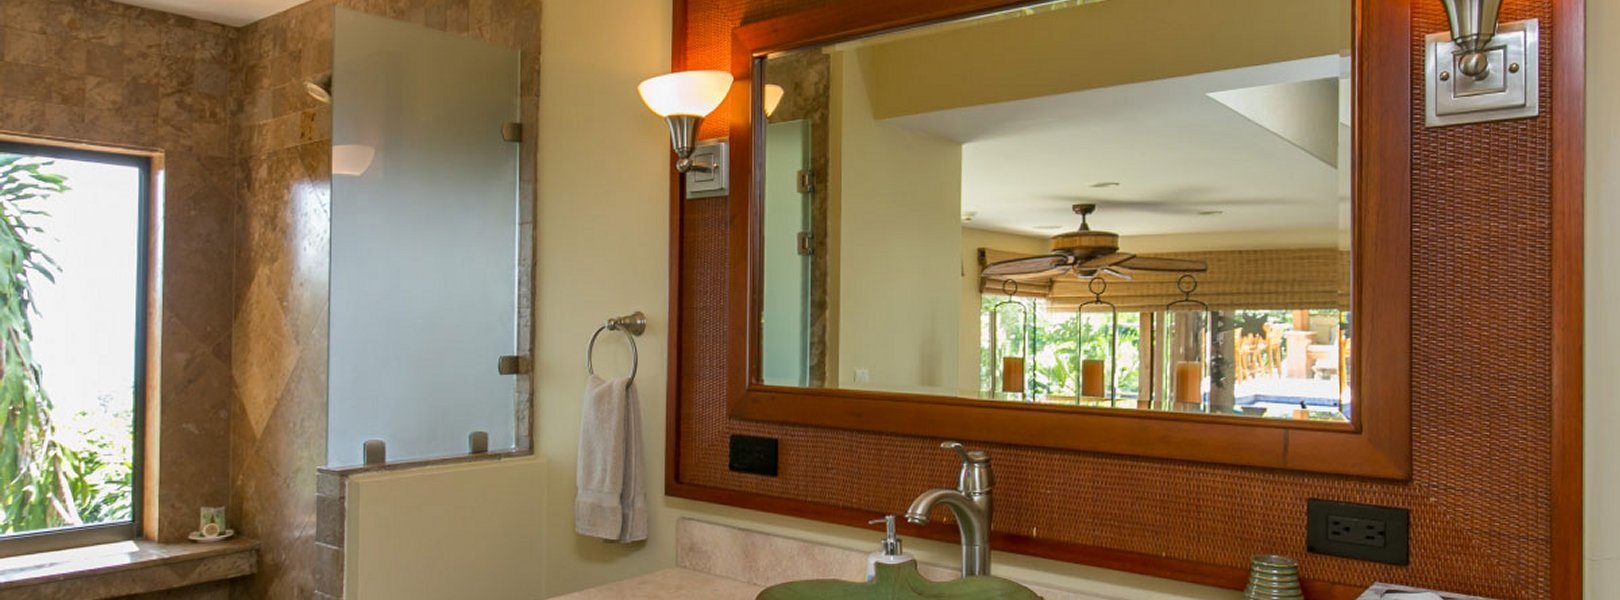 Enjoy this luxurious ensuite bathroom with clean towels and beautiful views.